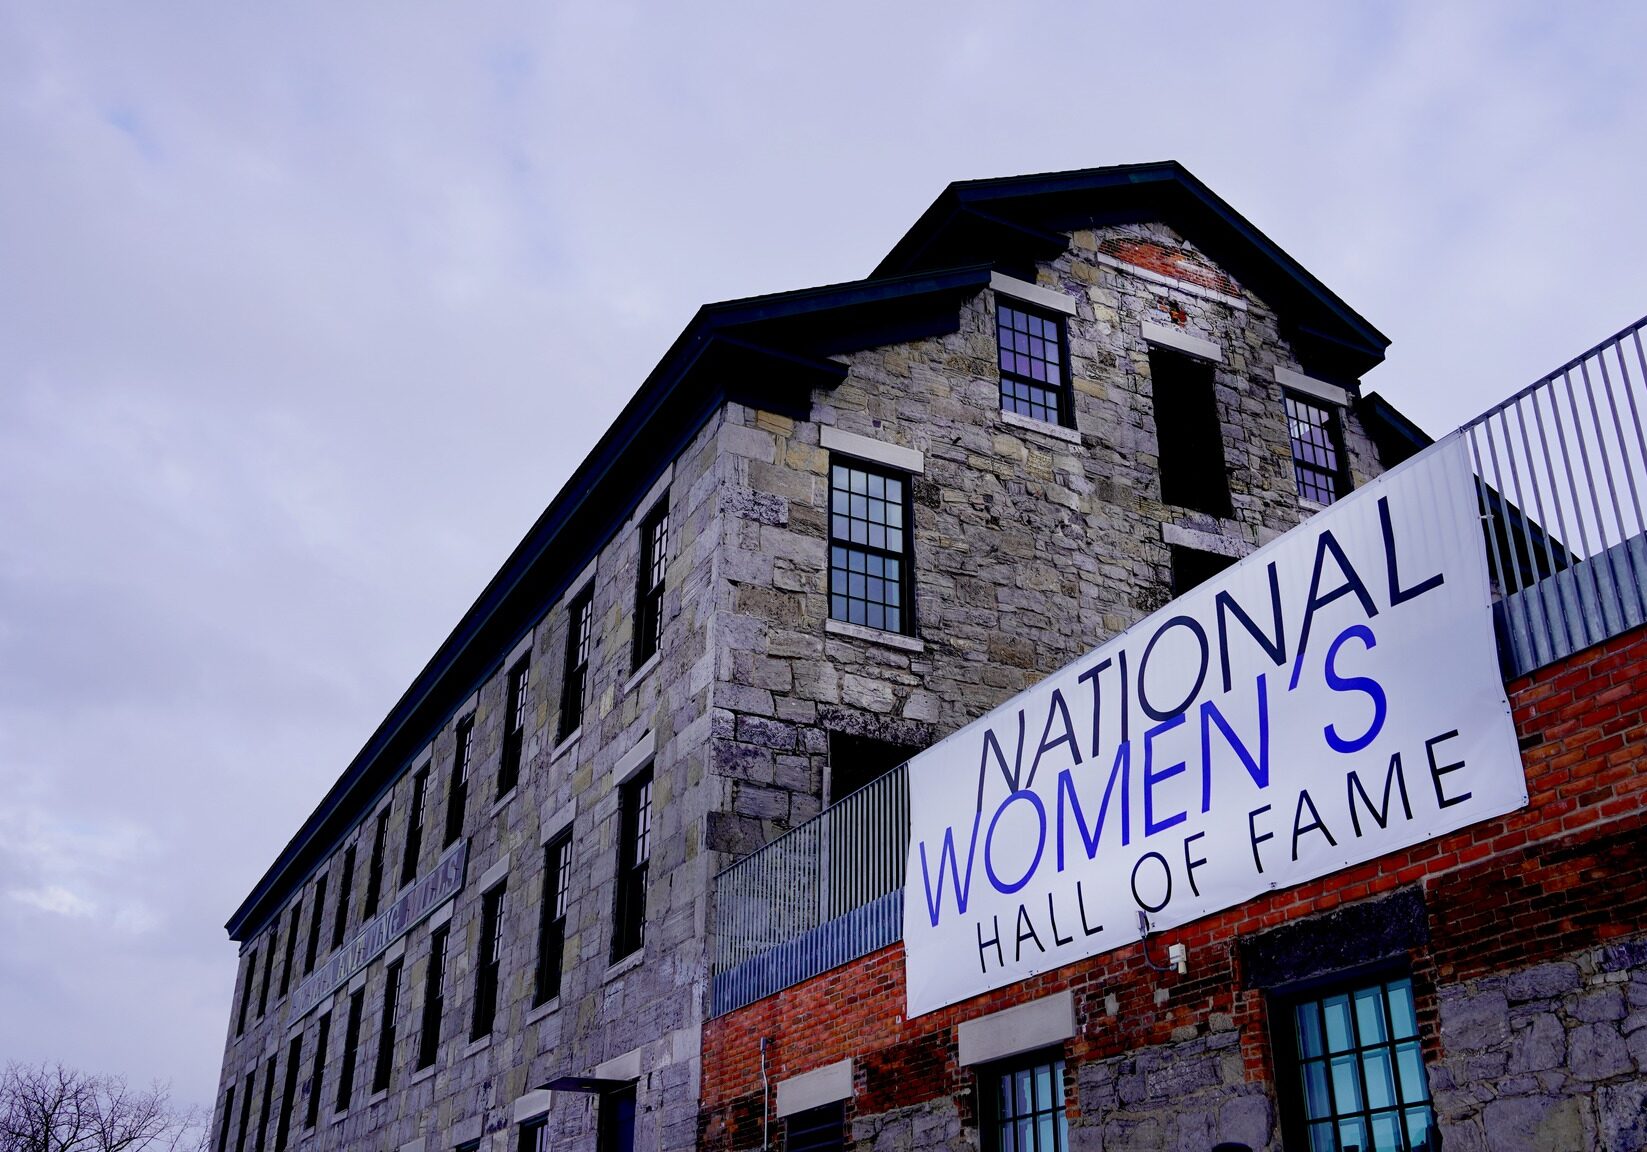 National Women's Hall of Fame exterior